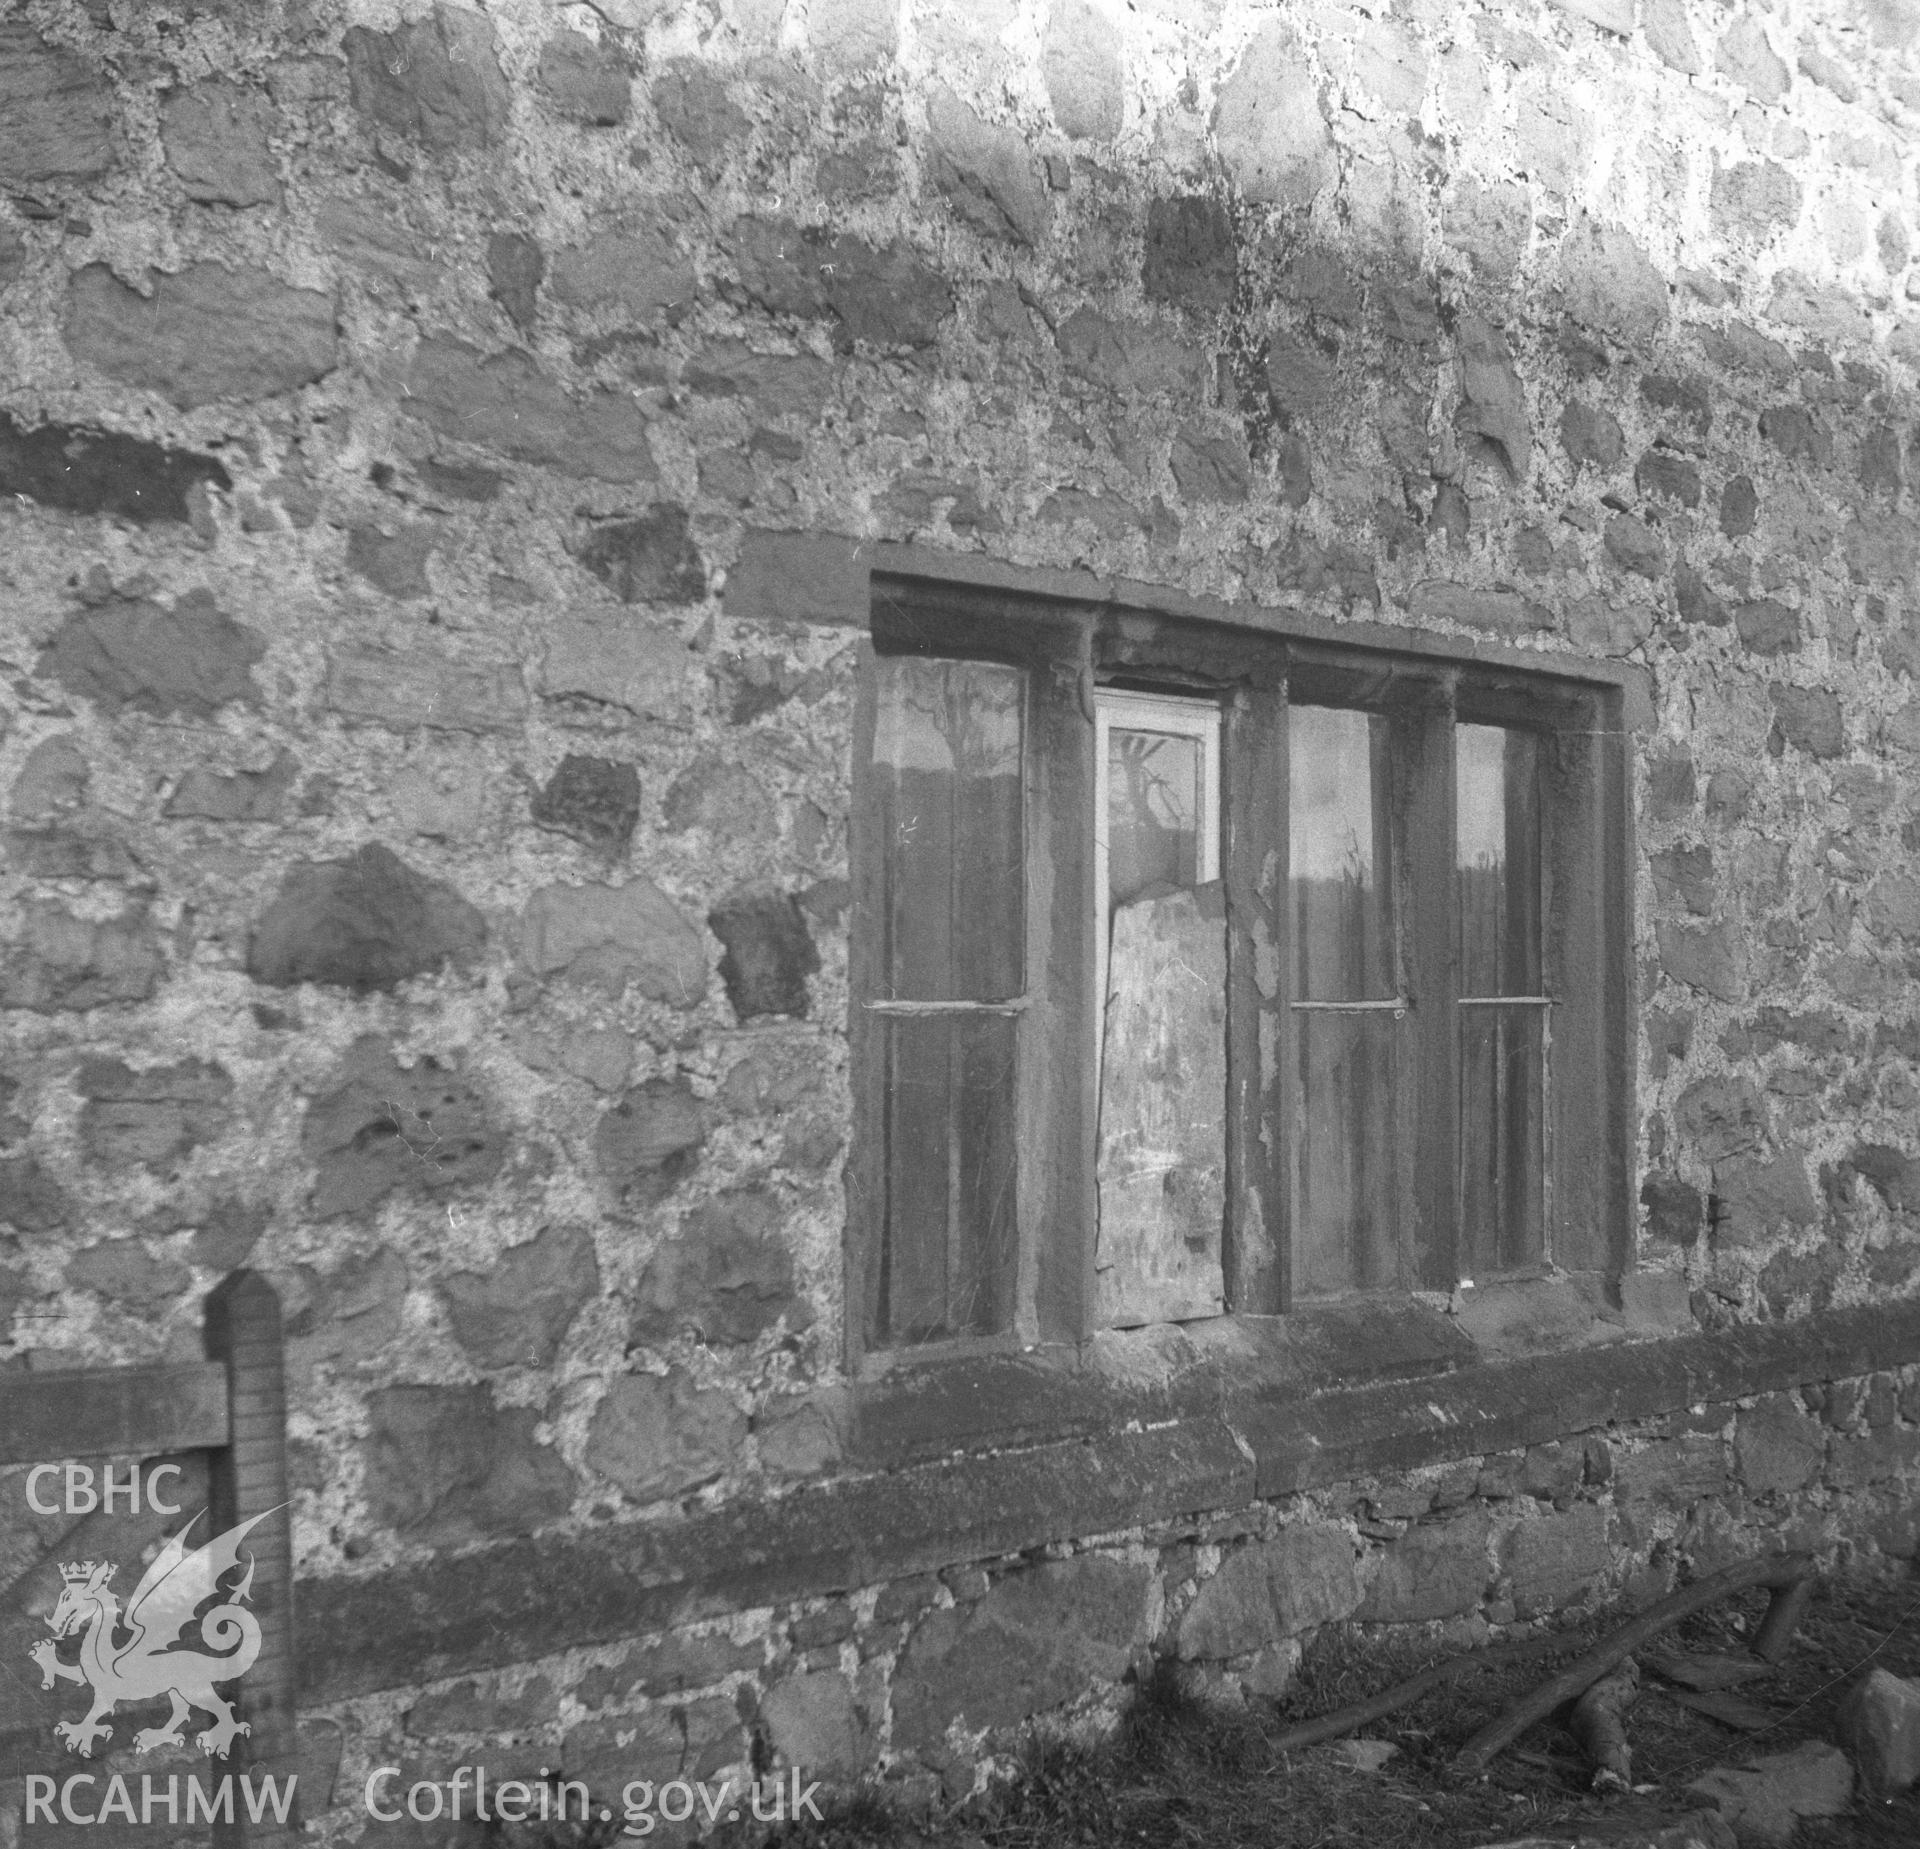 Black and white acetate negative showing exterior detail of window at Trimley Hall, Llanfynydd.